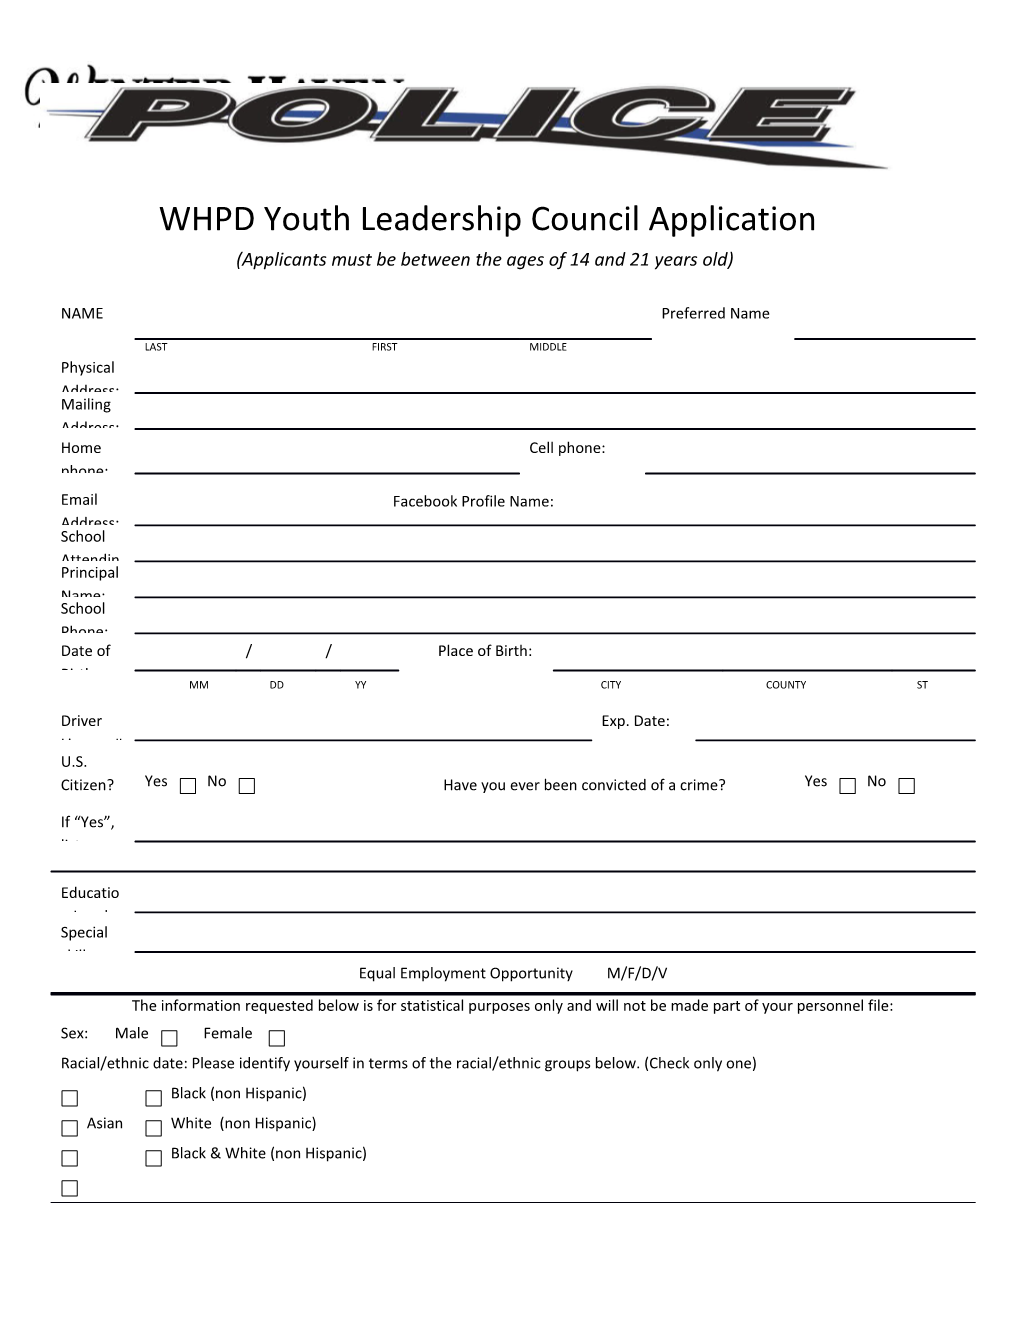 WHPD Youth Leadership Council Application